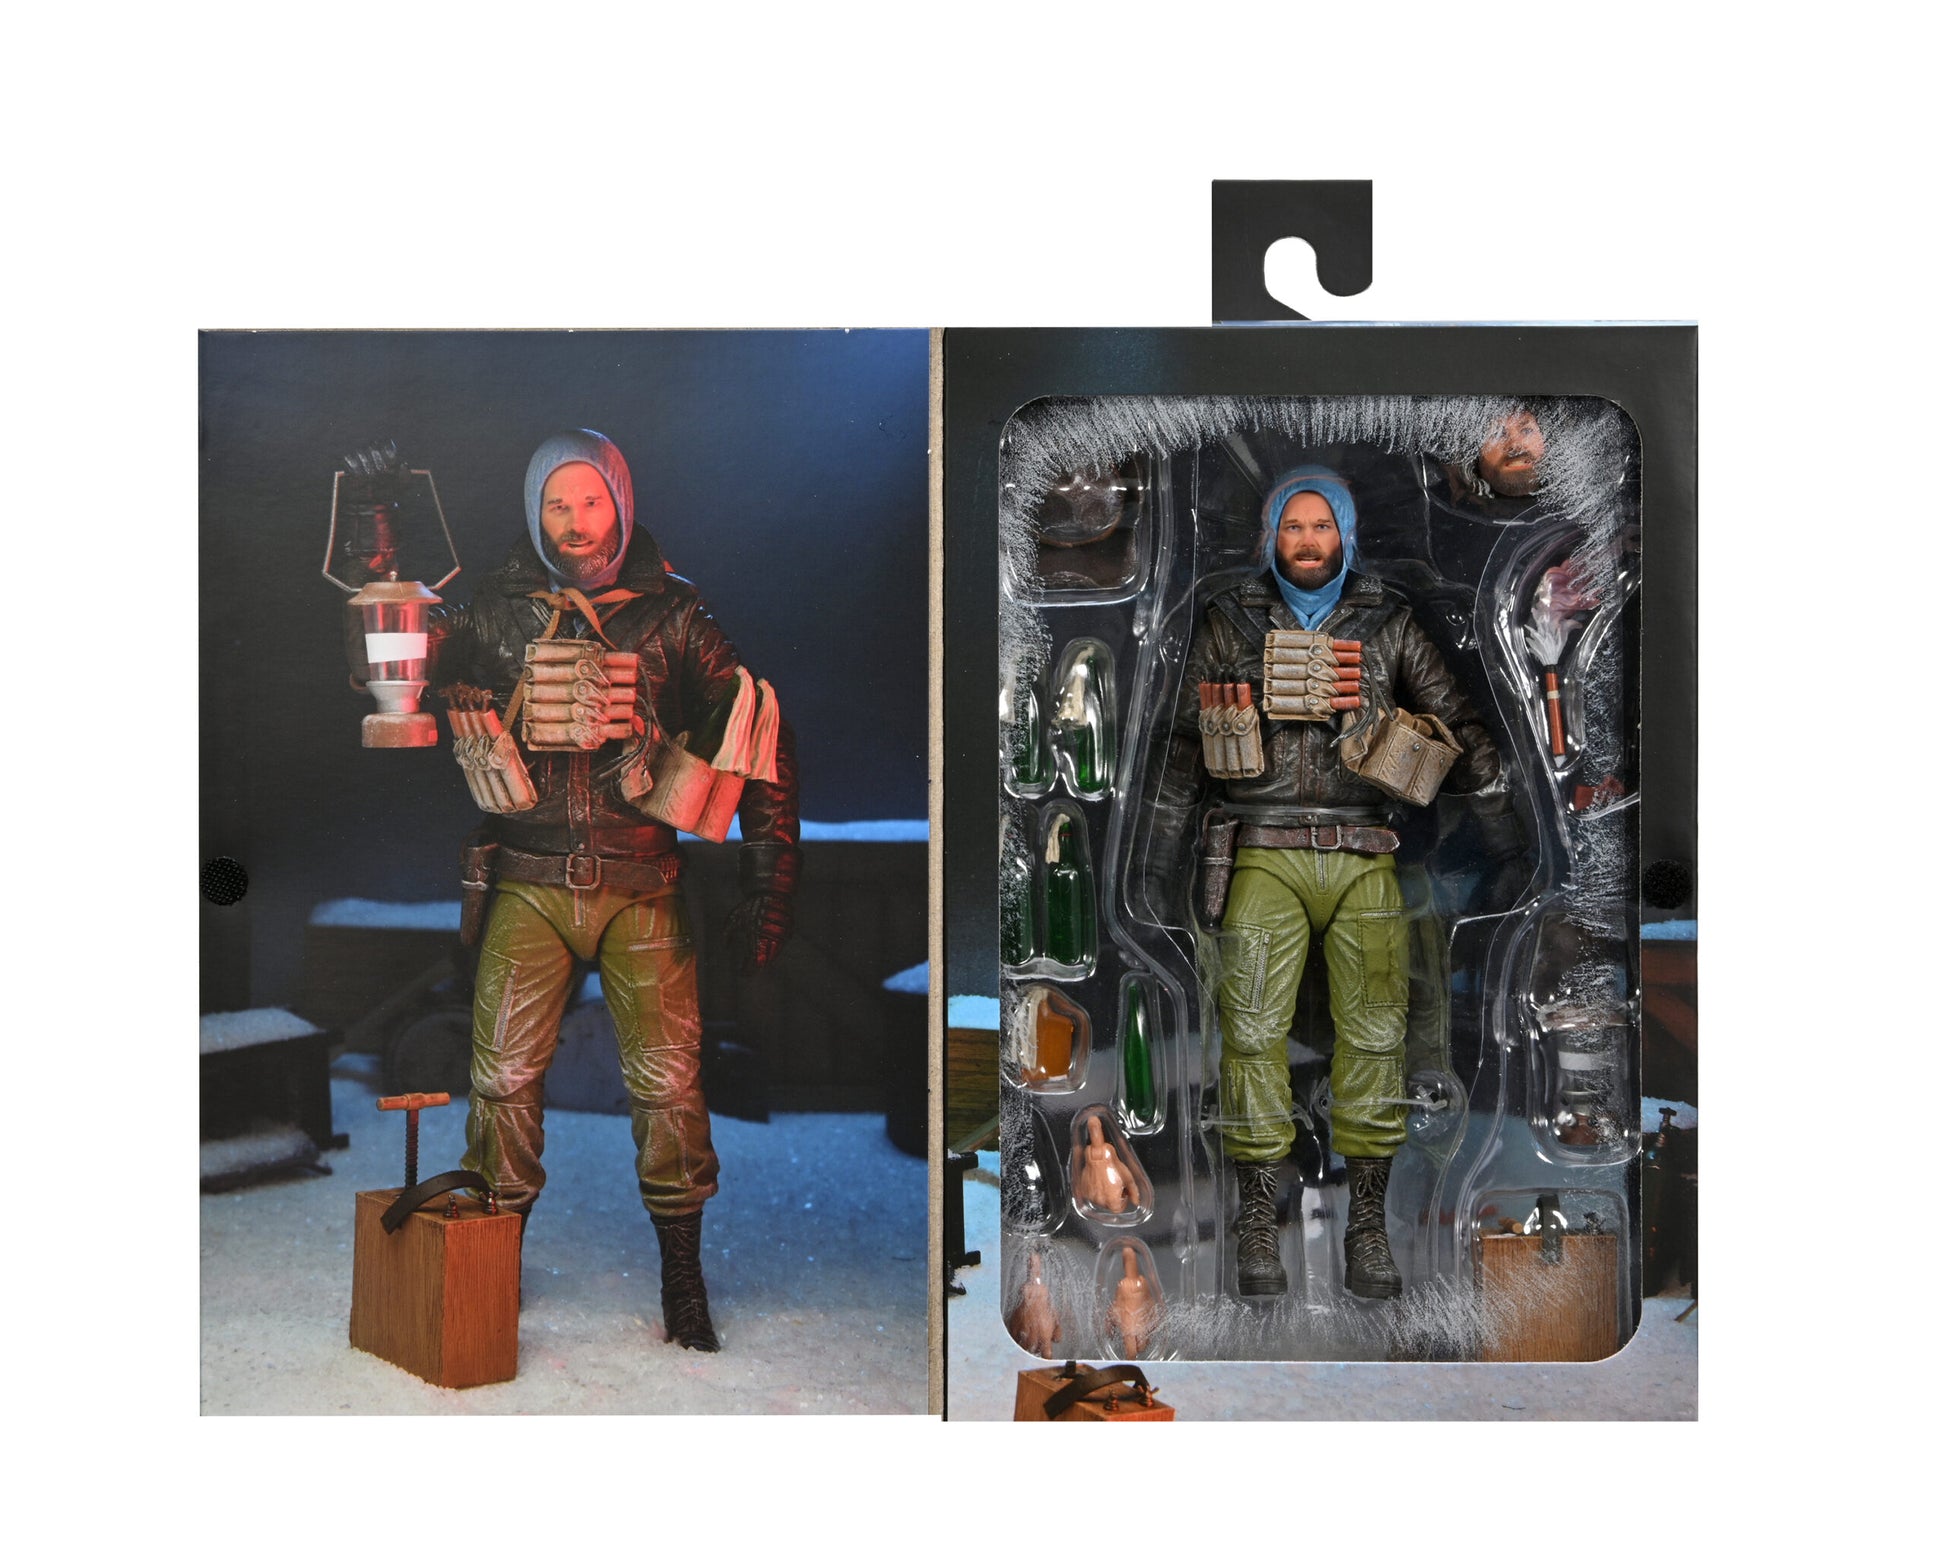 THE THING  MacReady v3 (Last Stand) 7" Ultimate action figure